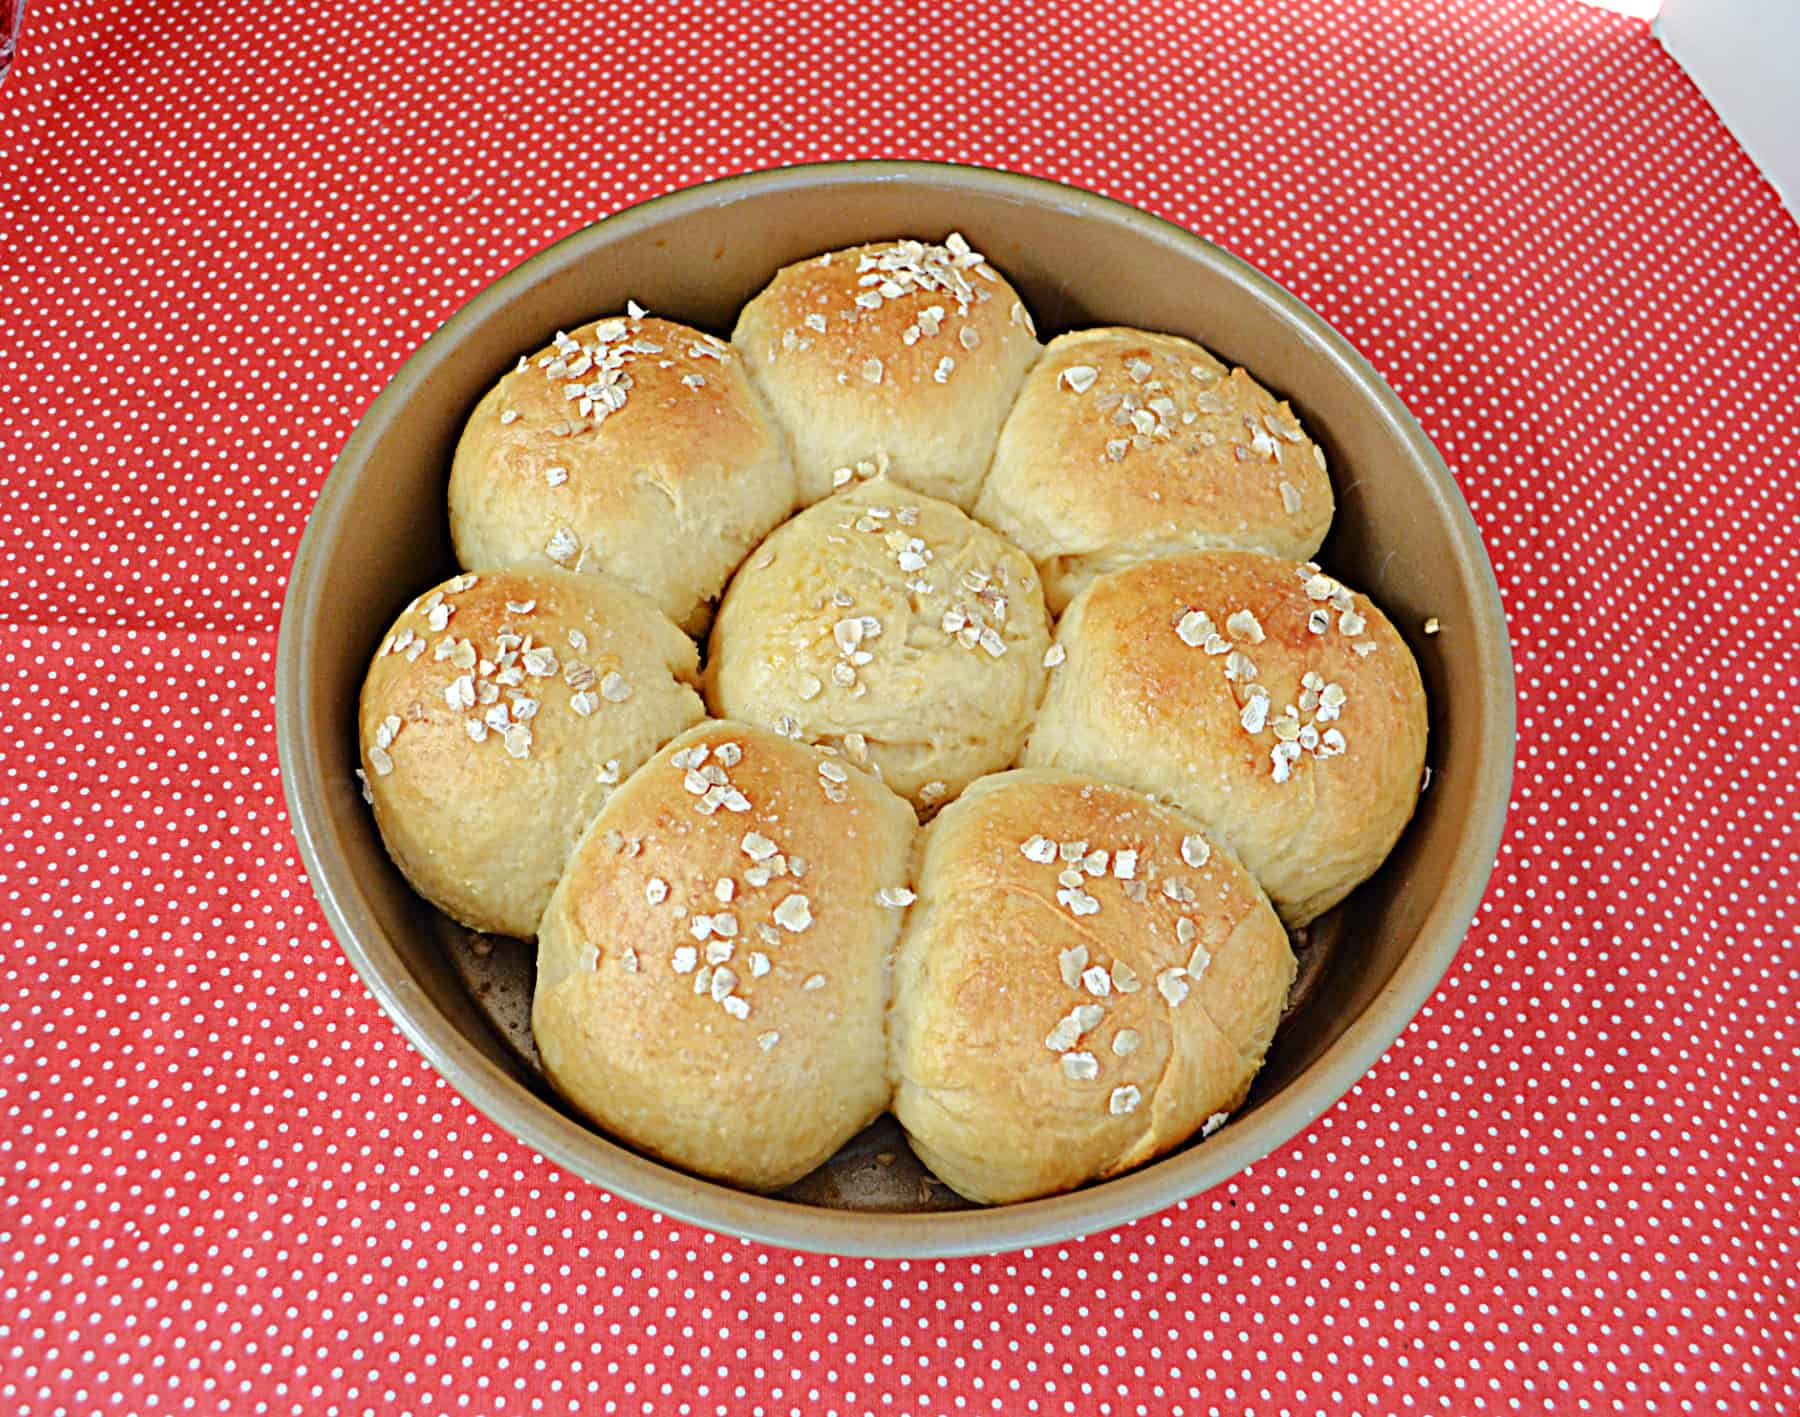 A pan with golden brown rolls in it.